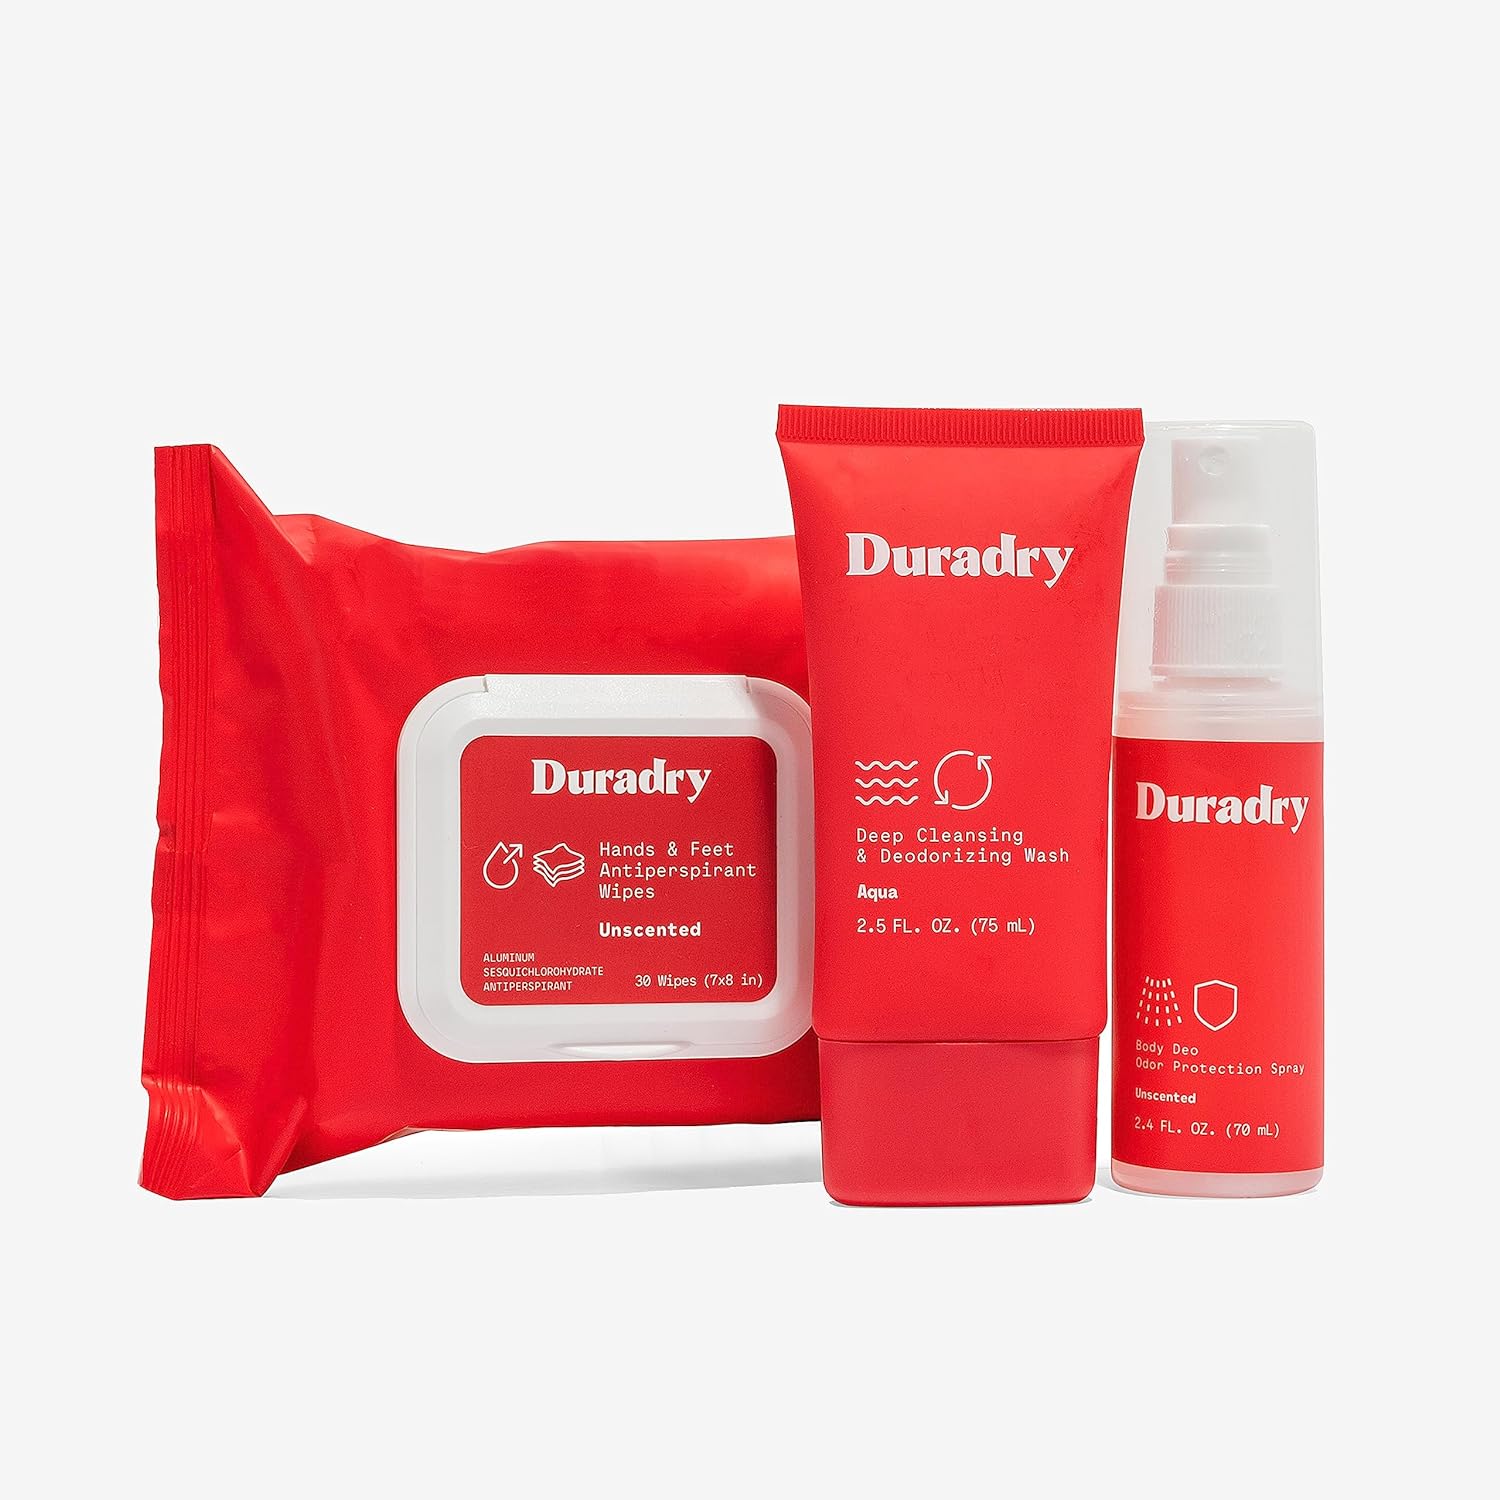 Duradry Feet System - Stops Sweaty Feet, Helps Control Foot Odor & Sweat, Infused with Vitamins and Minerals, Dermatologist Recommended - Body Wash, Antiperspirant Wipes, Body Deodorant Spray